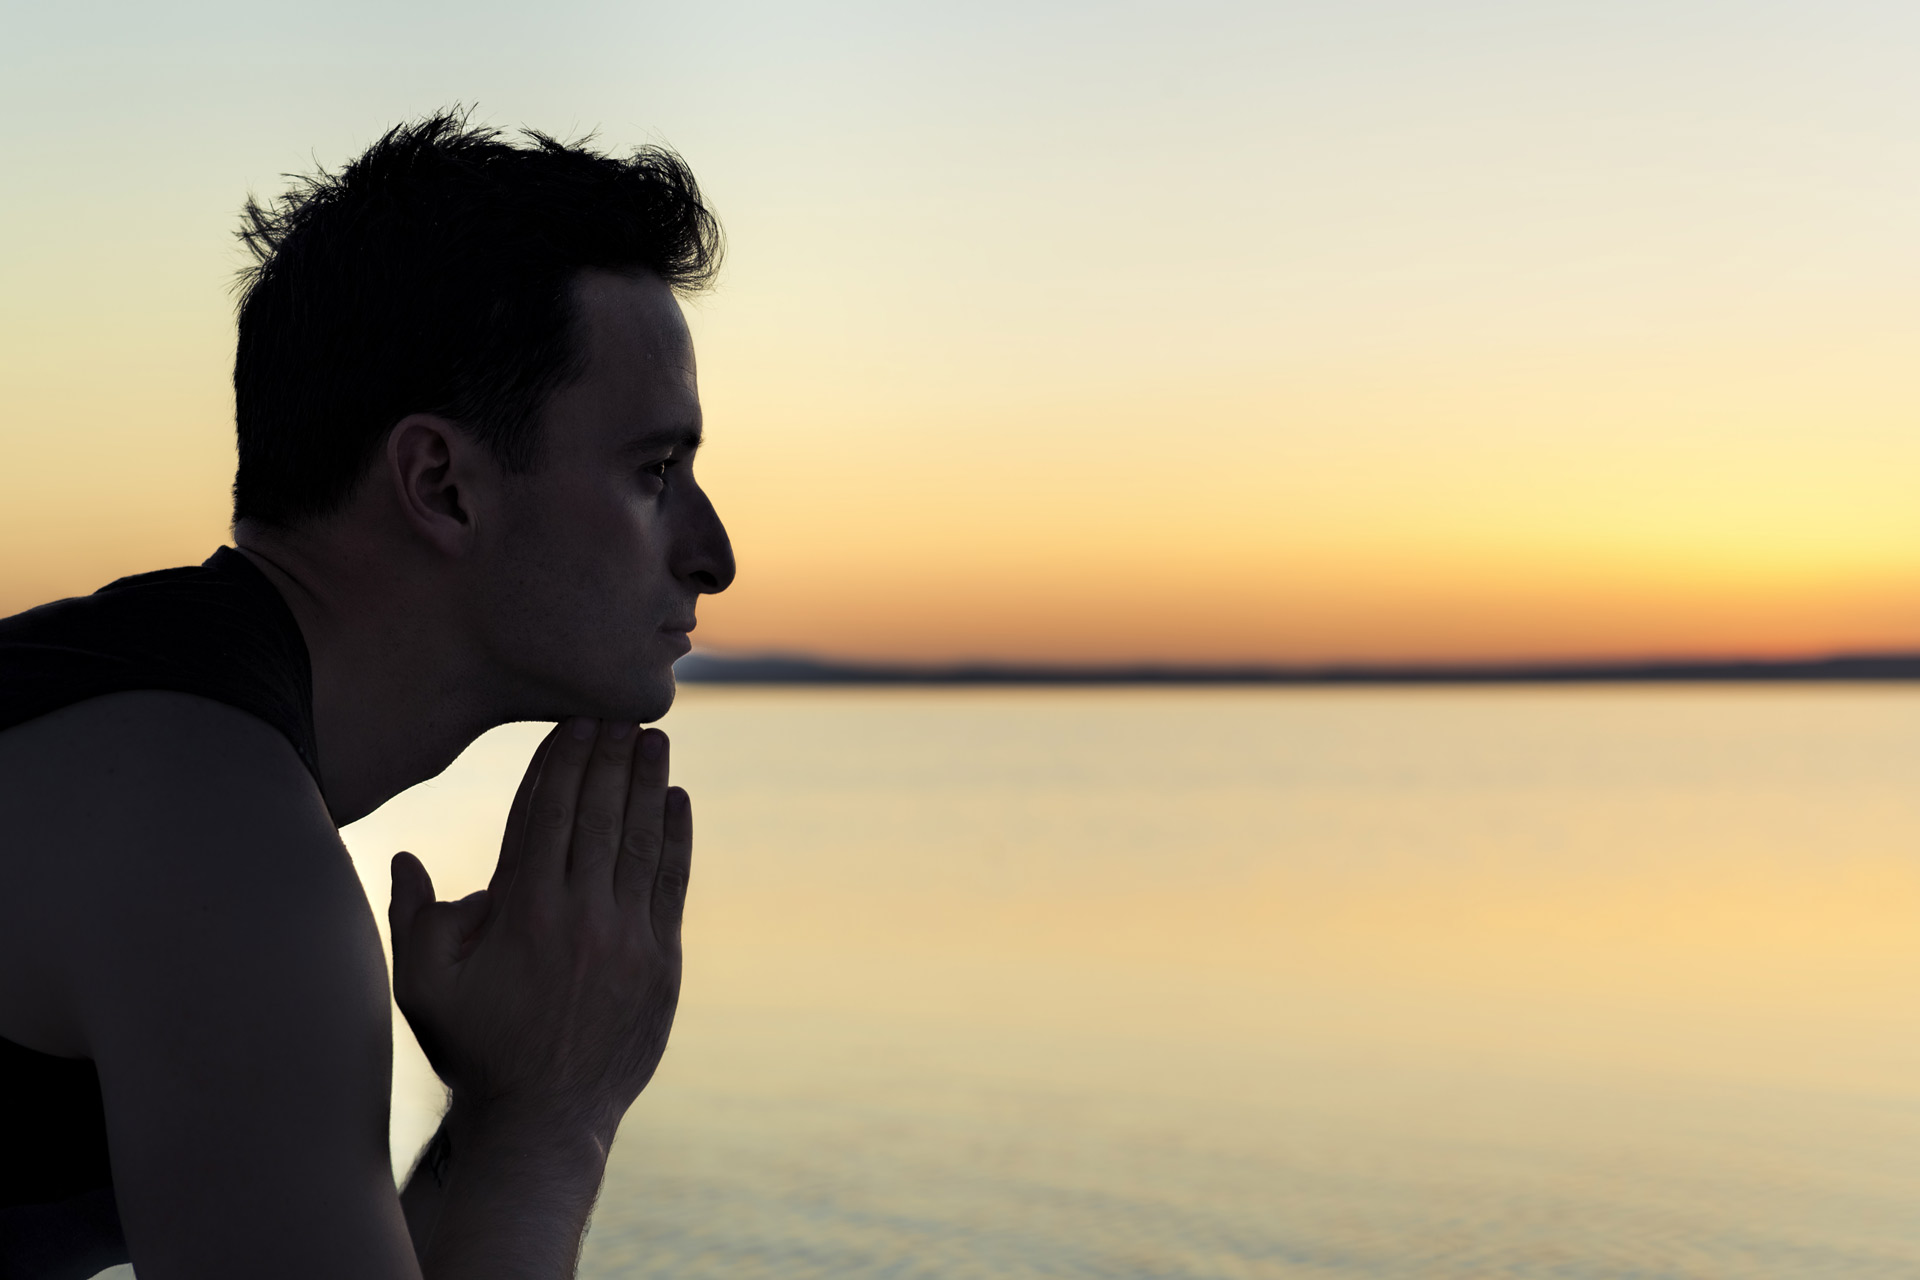 A person, seen in profile, holds their chin in their hands while looking pensively at a serene sunset over a calm body of water. The sky is a gradient of soft yellows and oranges transitioning into dusk, reflecting the healing environment provided by Khiron Clinics.